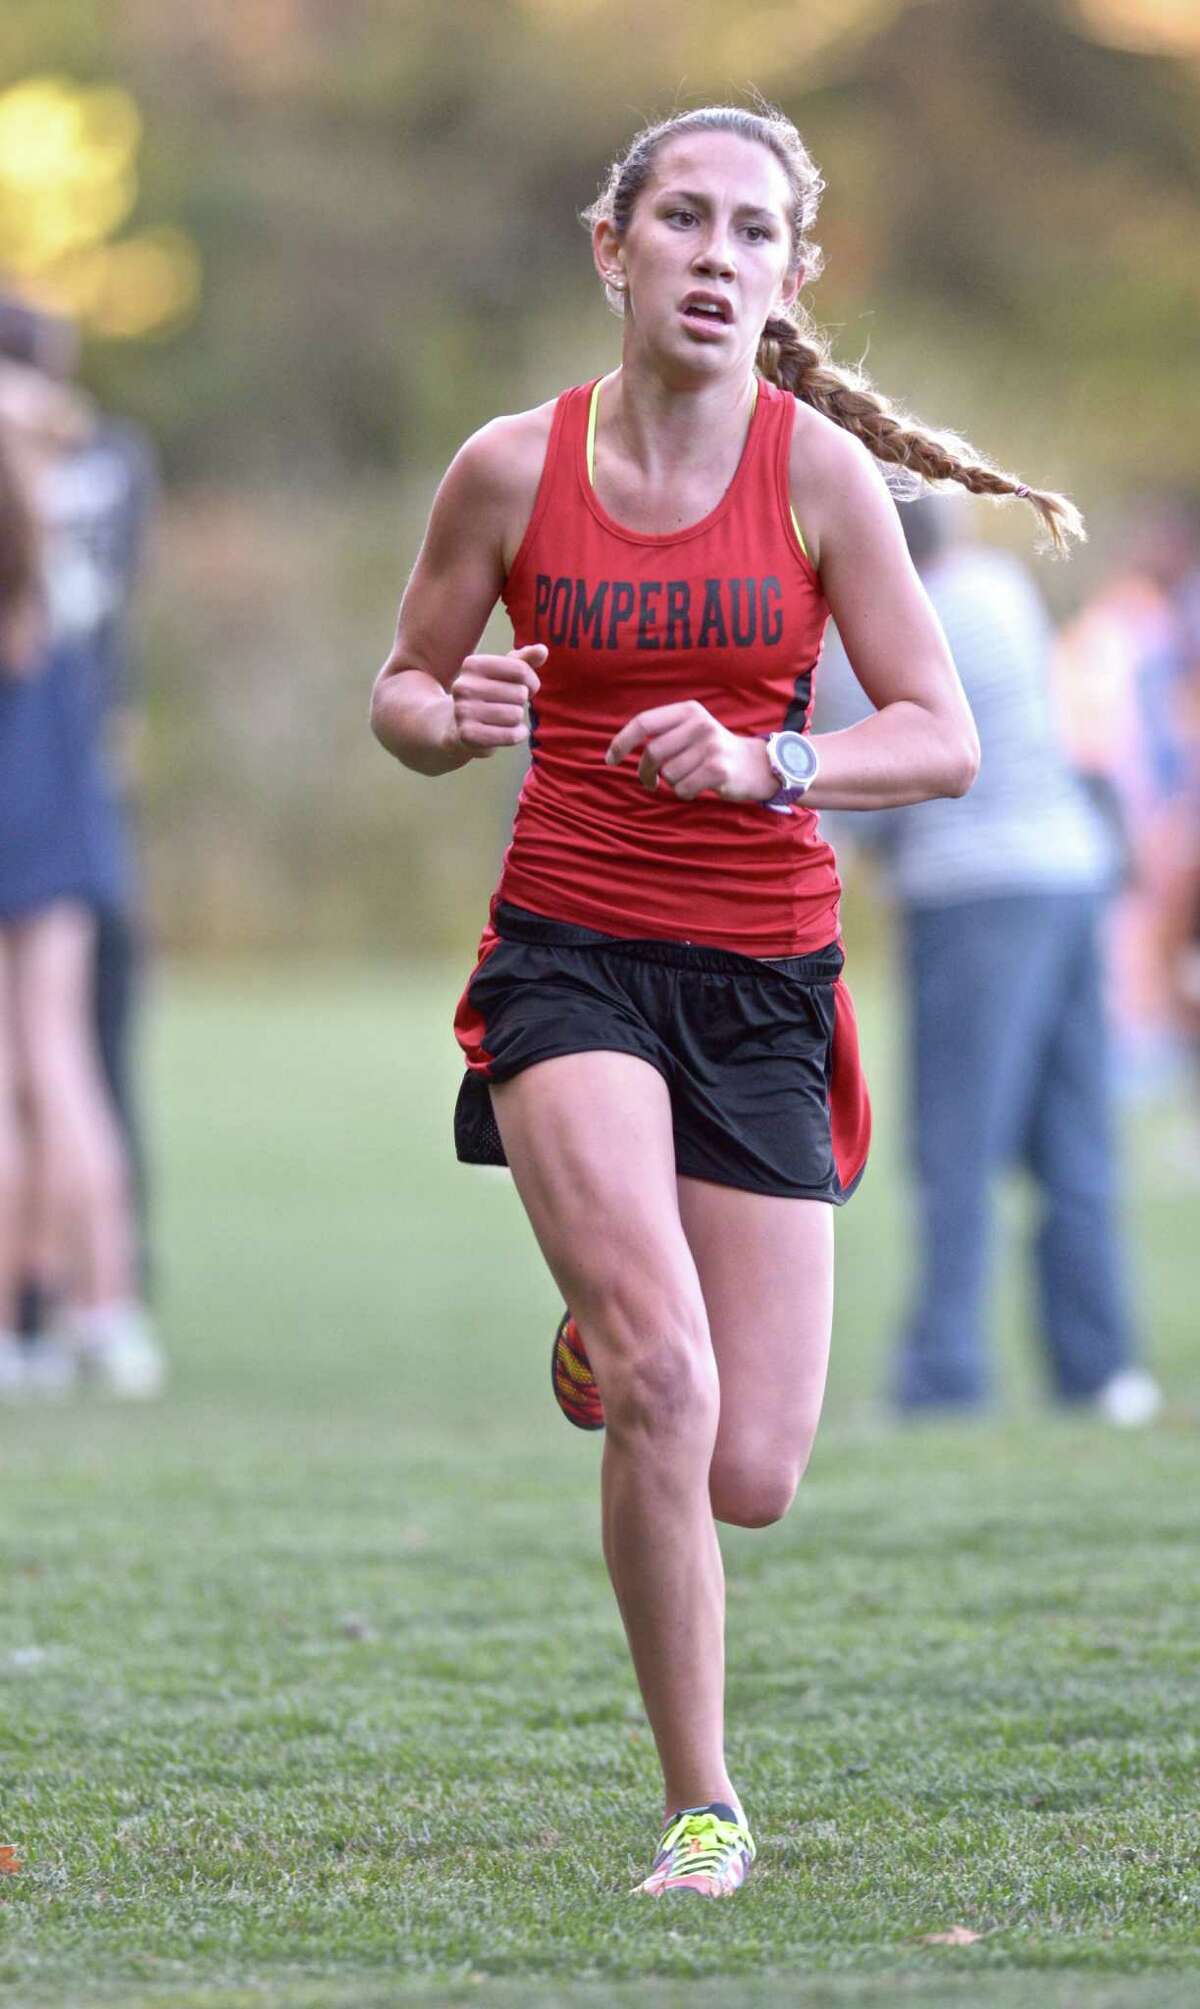 Ivy Walker, from Pomperaug High School, finished first in the girls high School cross country meet between Brookfield, Pomperaug and Newtown high schools on Tuesday, October 6, 2015, at Reed Intermediate School, Newtown, Conn.